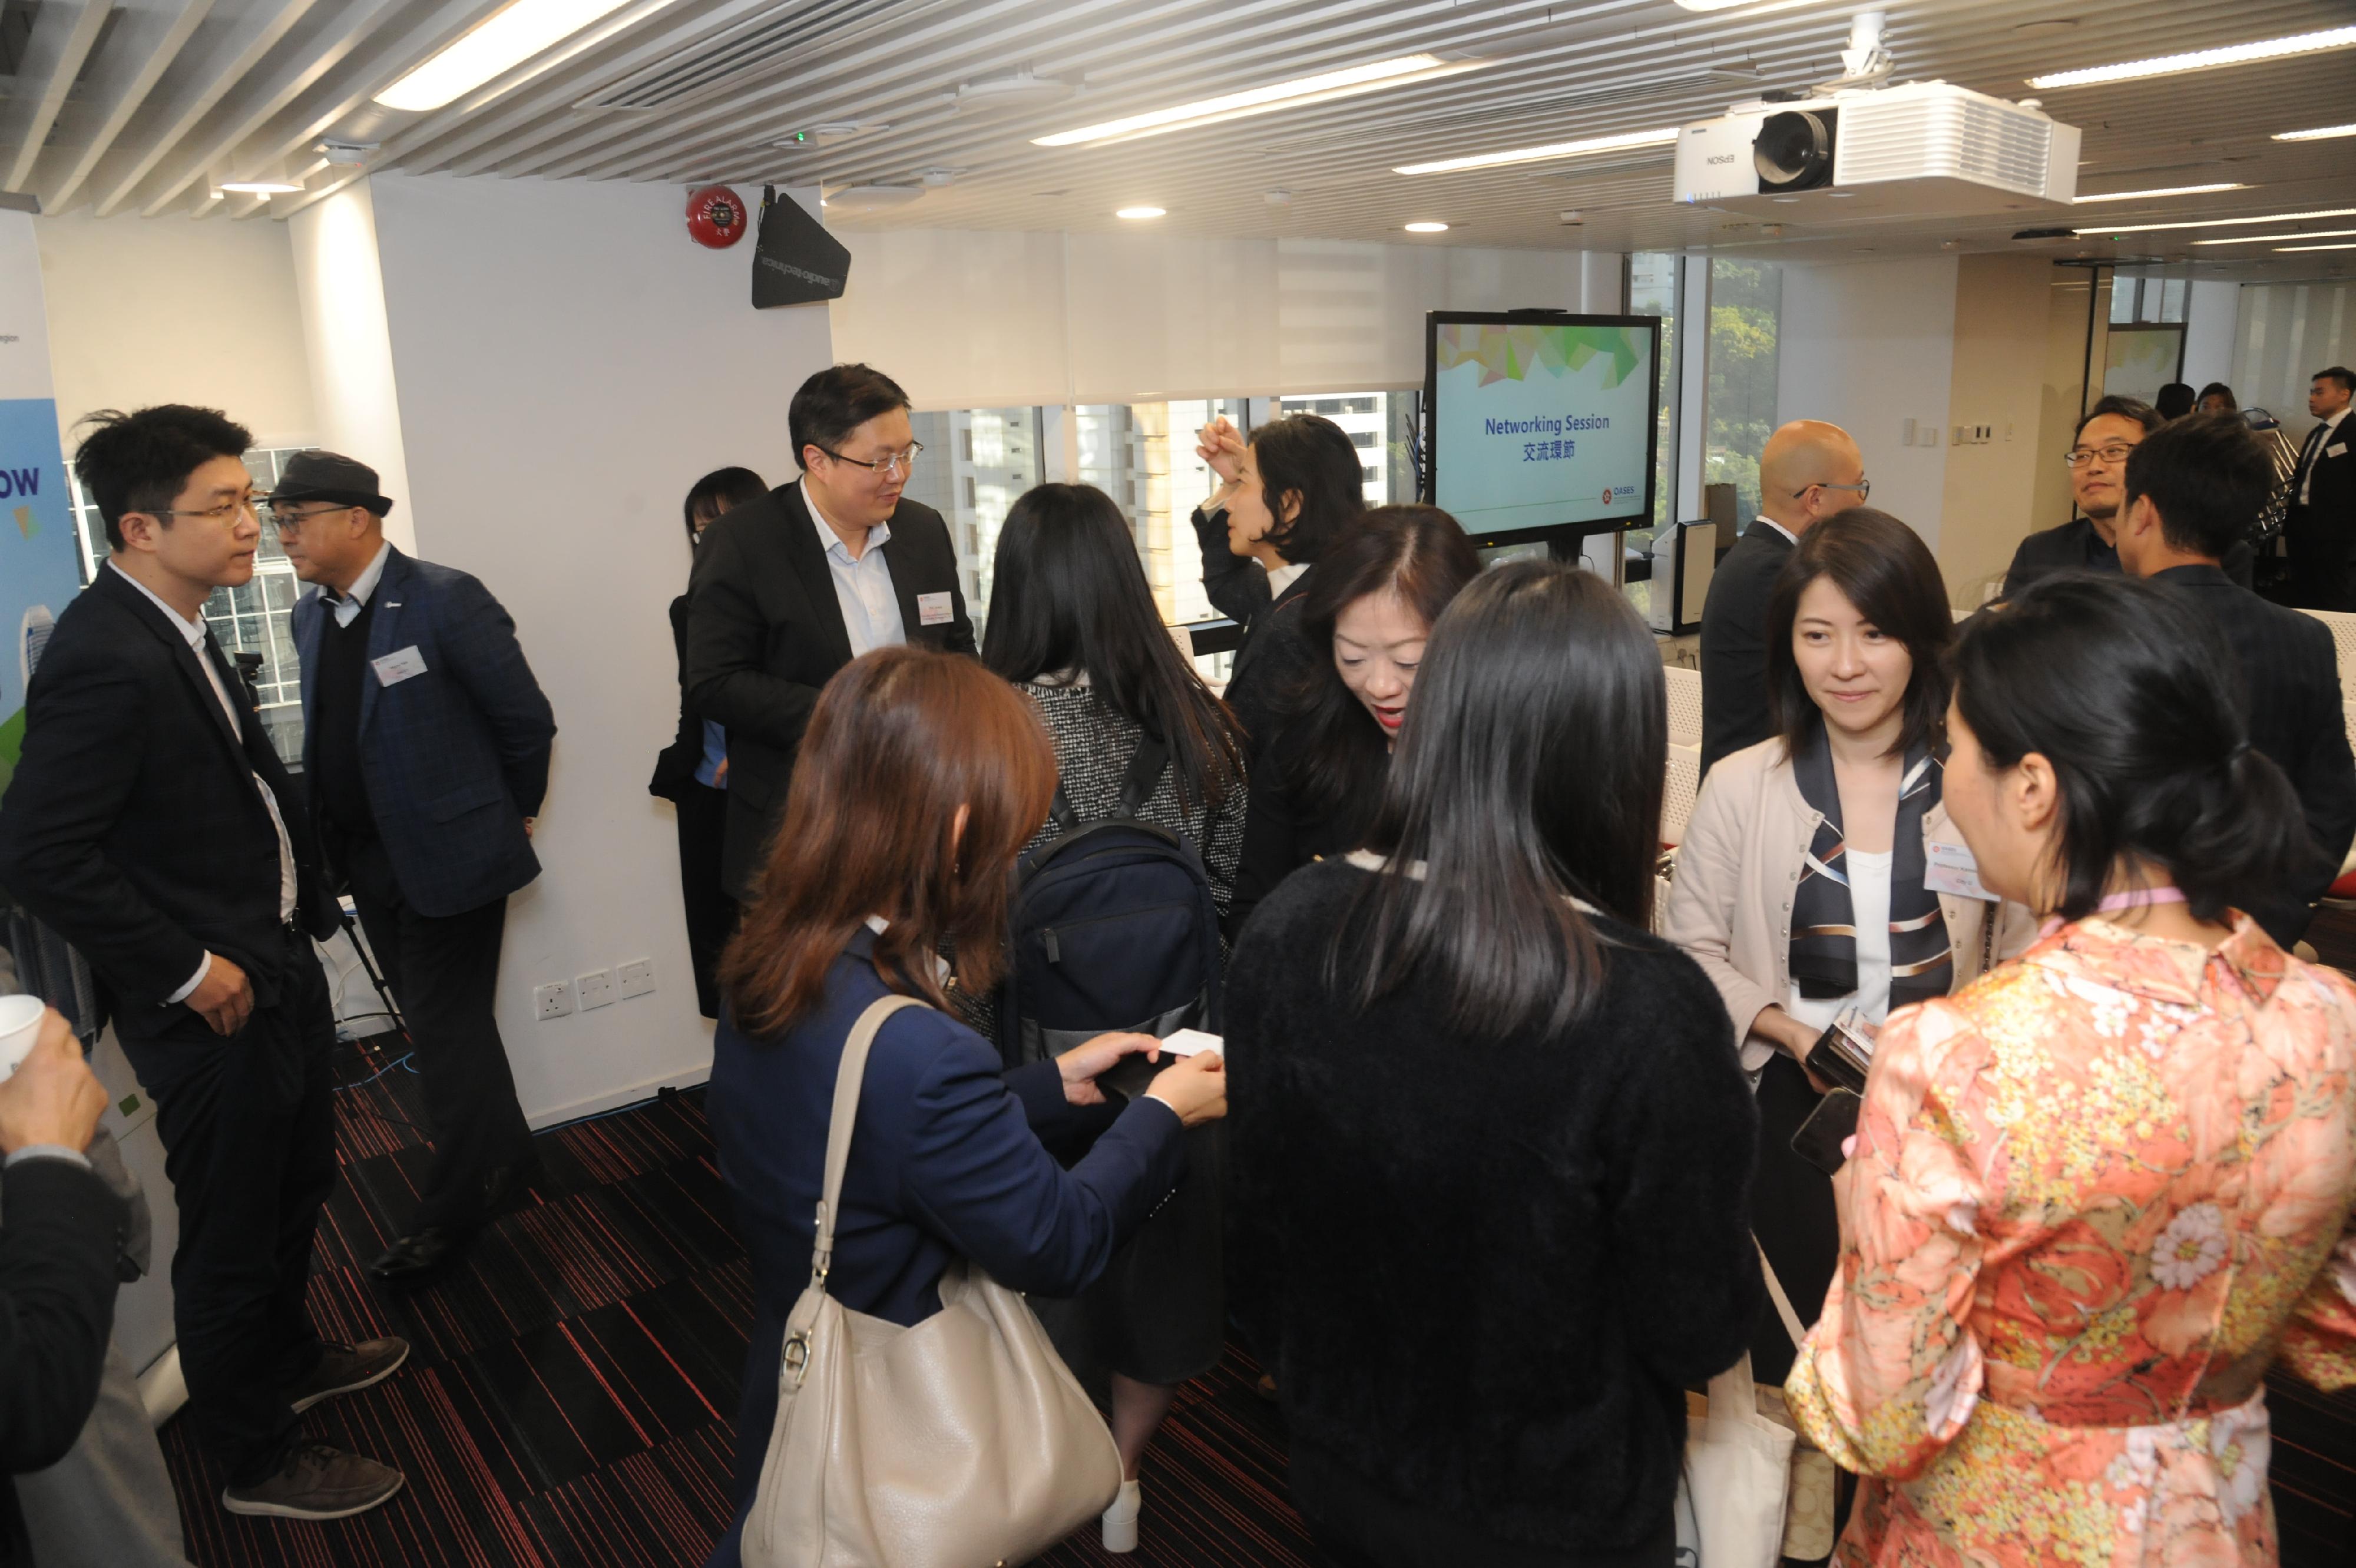 The Office for Attracting Strategic Enterprises held a networking event themed "Meet the Partners" today (November 17). Photo shows Office for Attracting Strategic Enterprises Partners networking with representatives from local universities.

